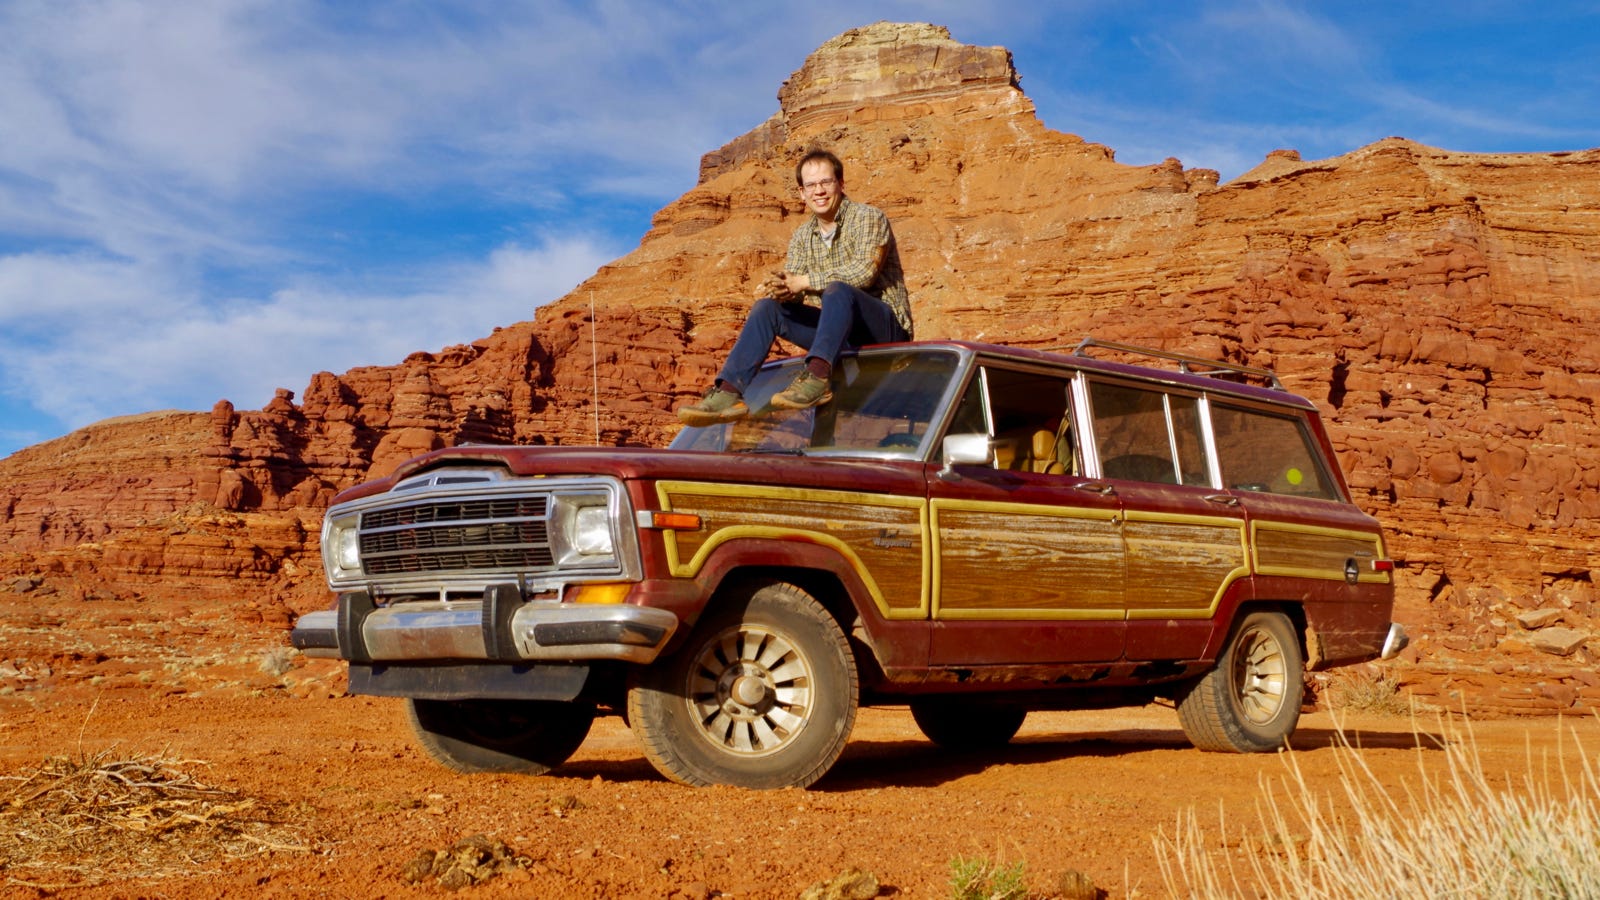 How My $800 Jeep Grand Wagoneer Made It 1,700 Miles To Moab Despite A Scary Breakdown